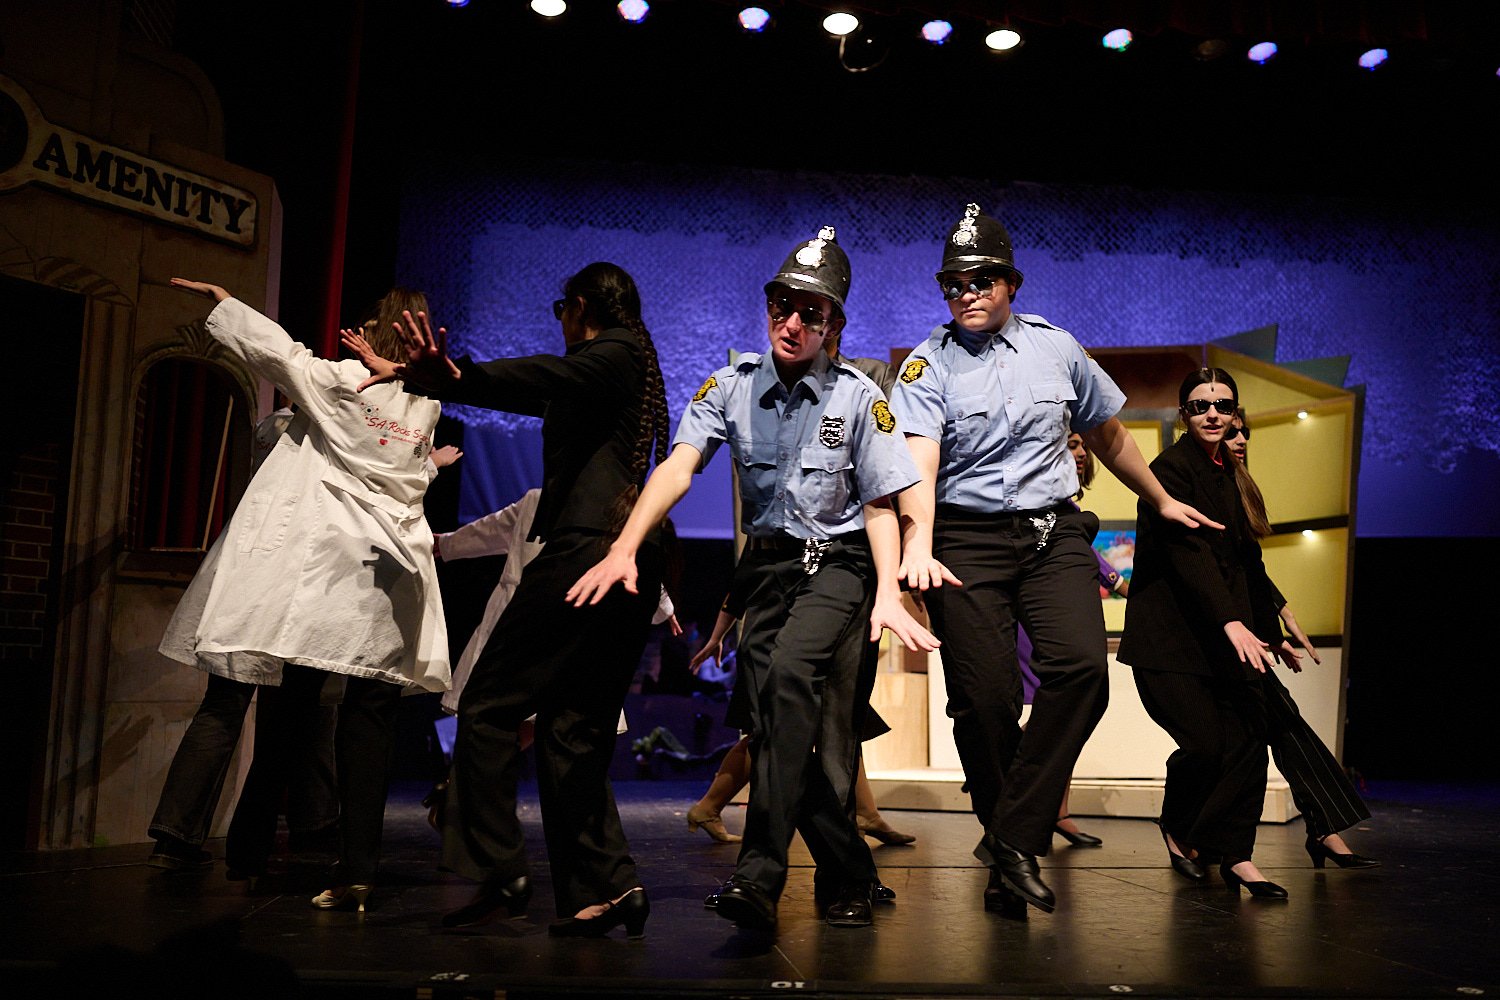  SEWICKLEY, PA, USA - MARCH 2ND 2022: High School students of Sewickley Academy are performing in an annual musical show “Urinetown” running on March 3rd-5th 2022. Severin Harmon 